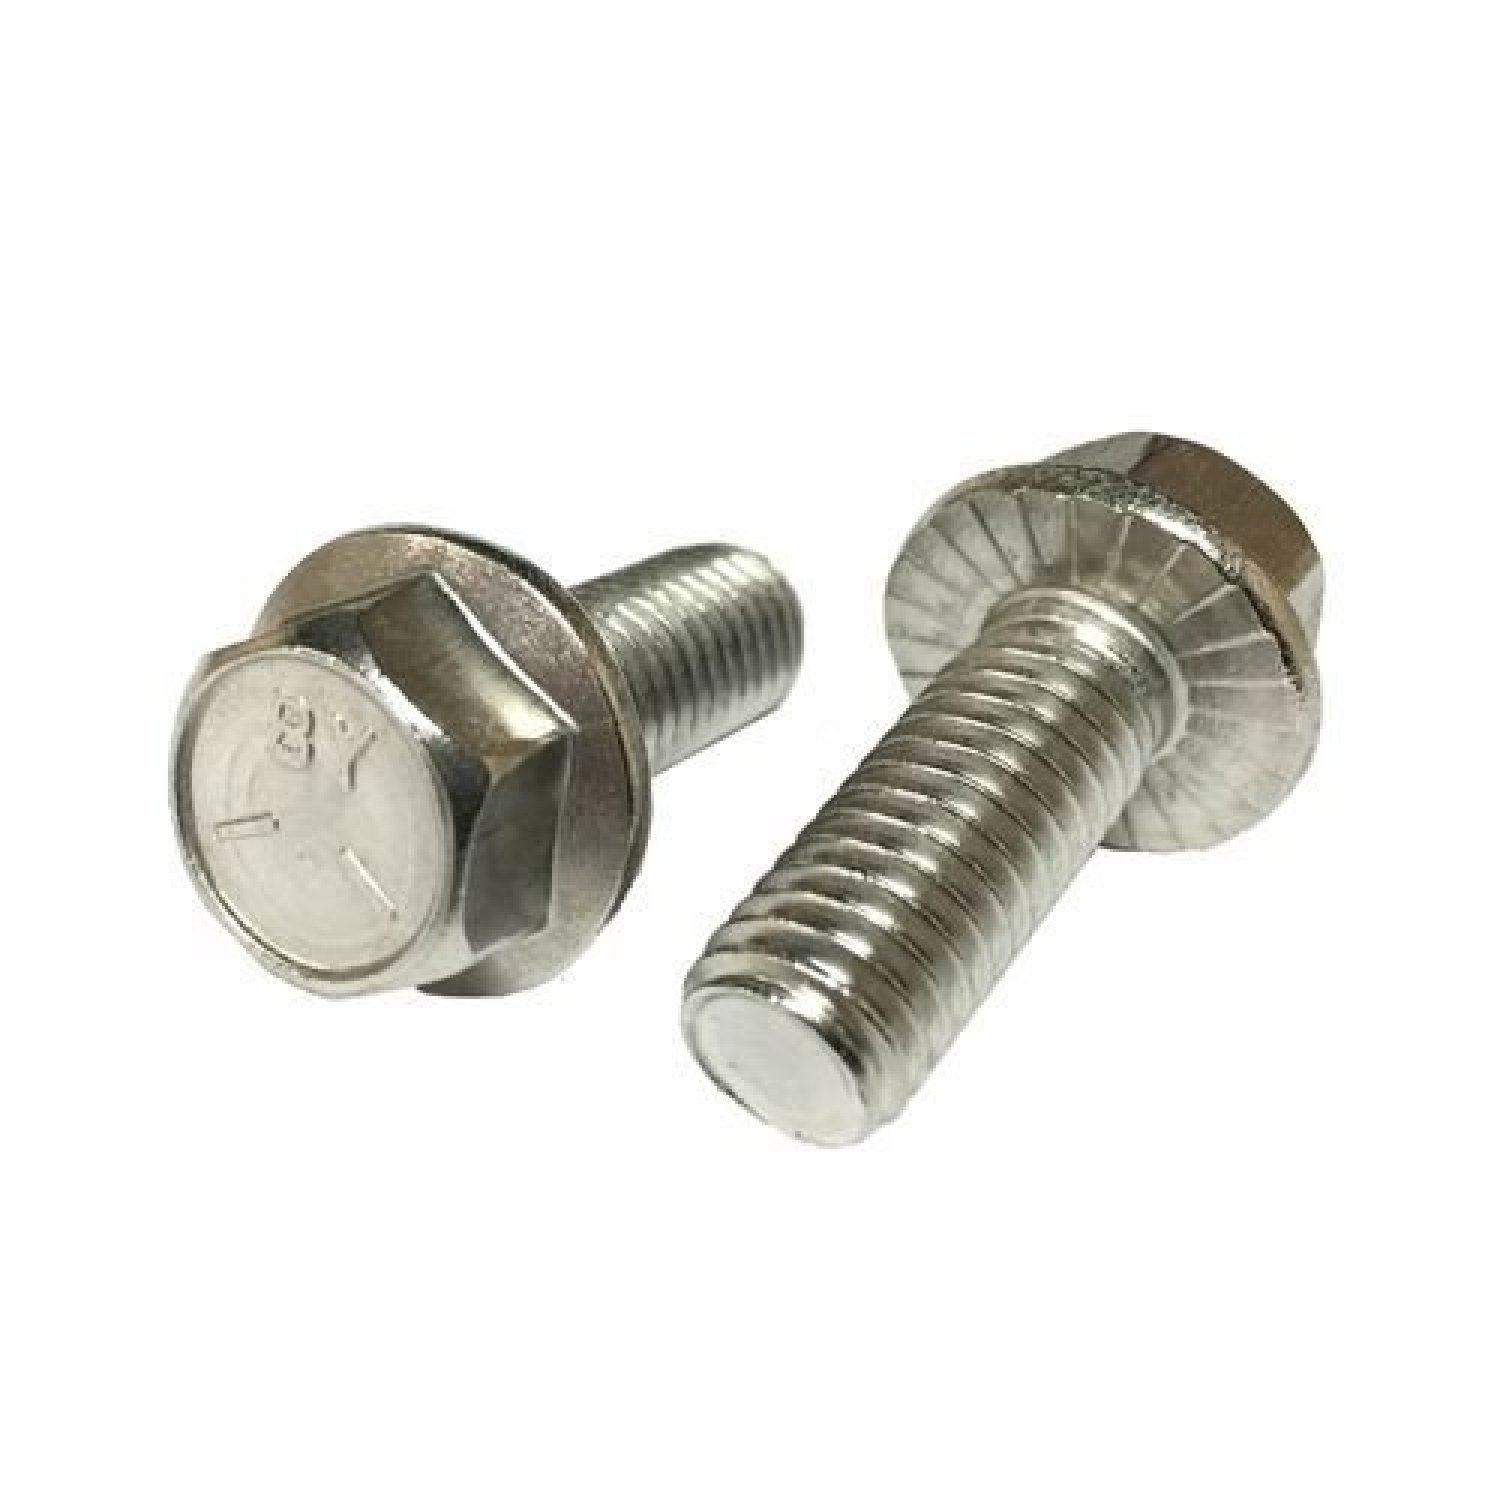 8) 5/16-18X1-1/2 Stainless Steel Hex Serrated Flange Screws Flange Bolts 304 